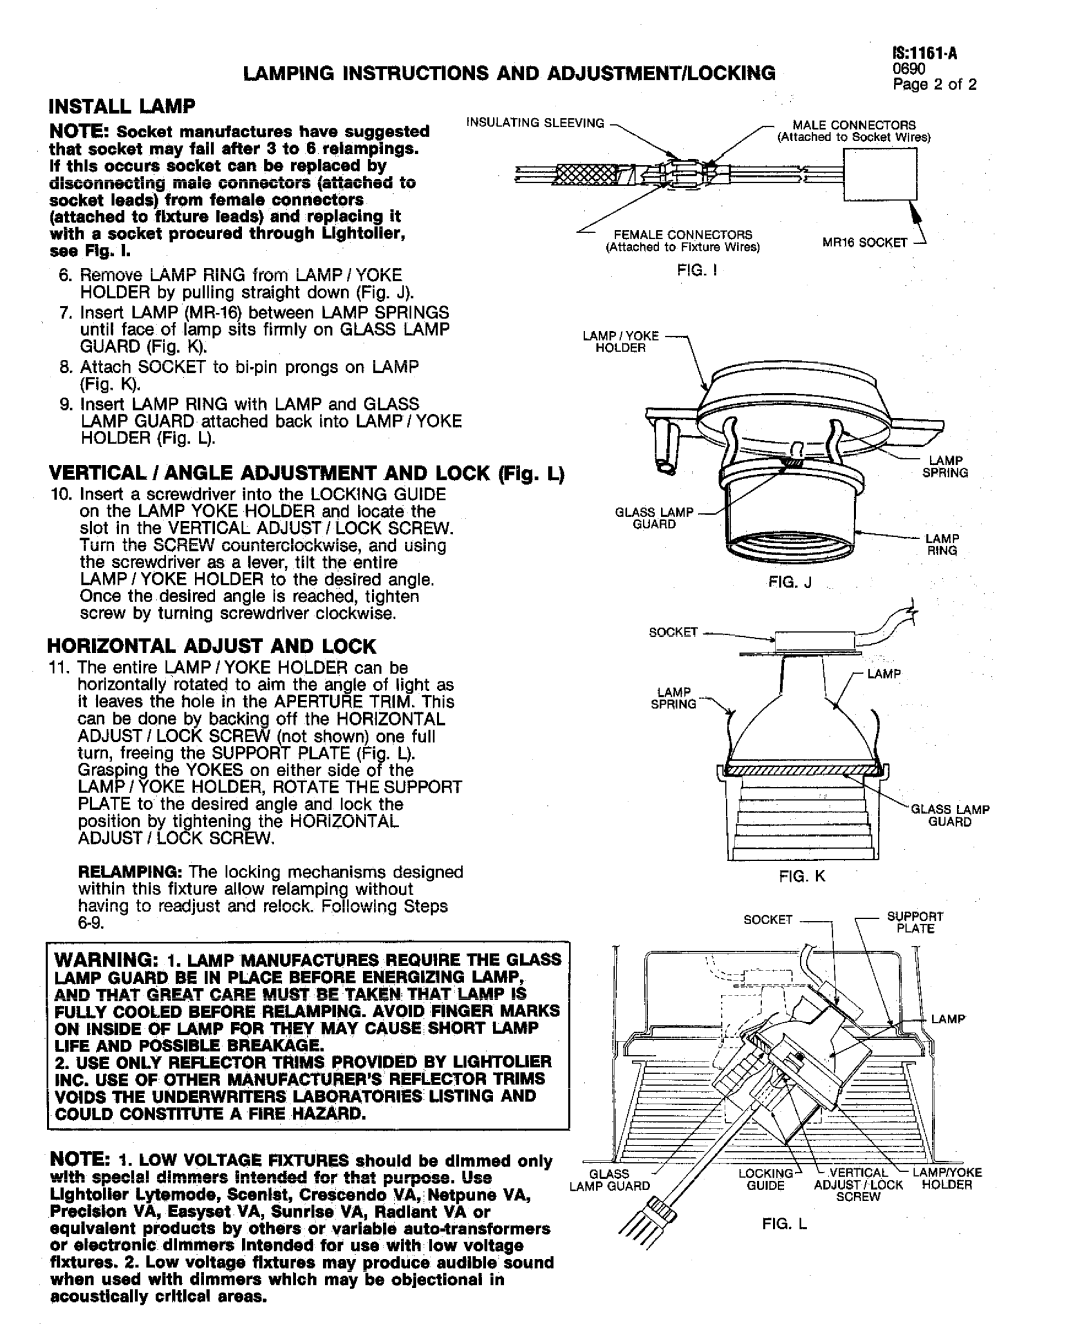 Lightolier IS:1161-A instruction sheet Lamping Instructions And 